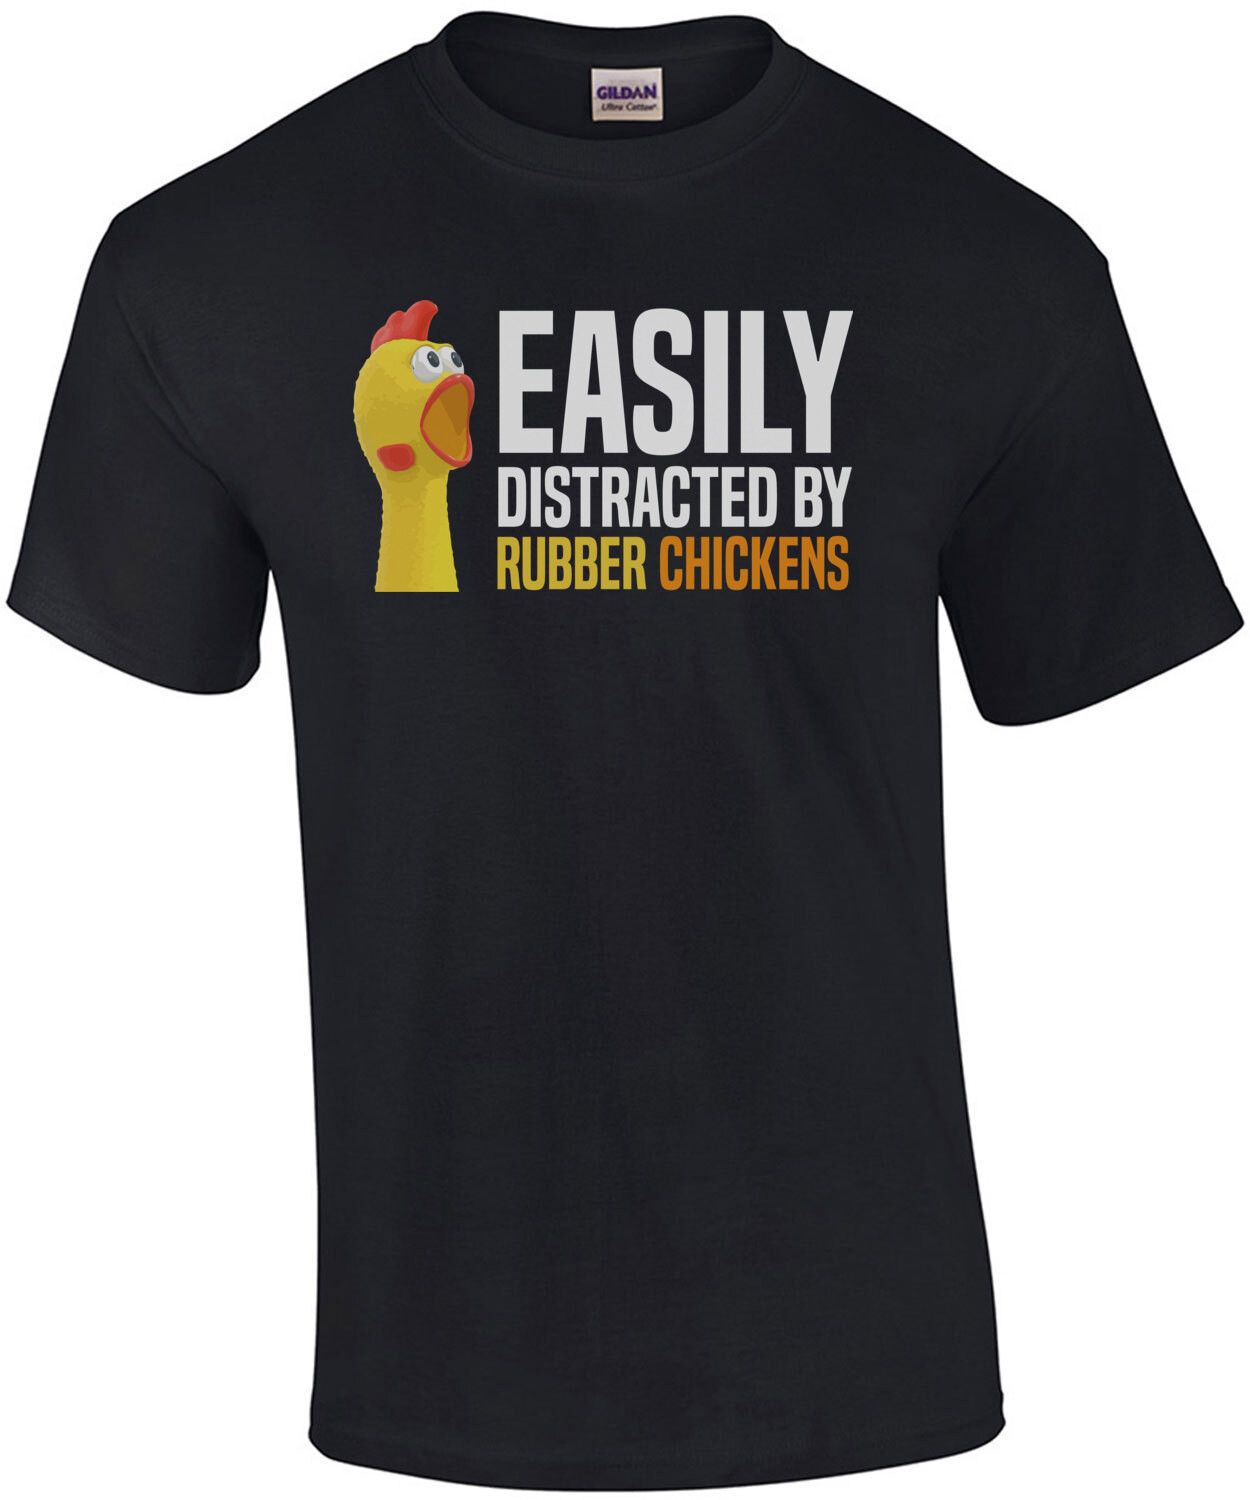 Easily Distracted By Rubber Chickens - funny t-shirt